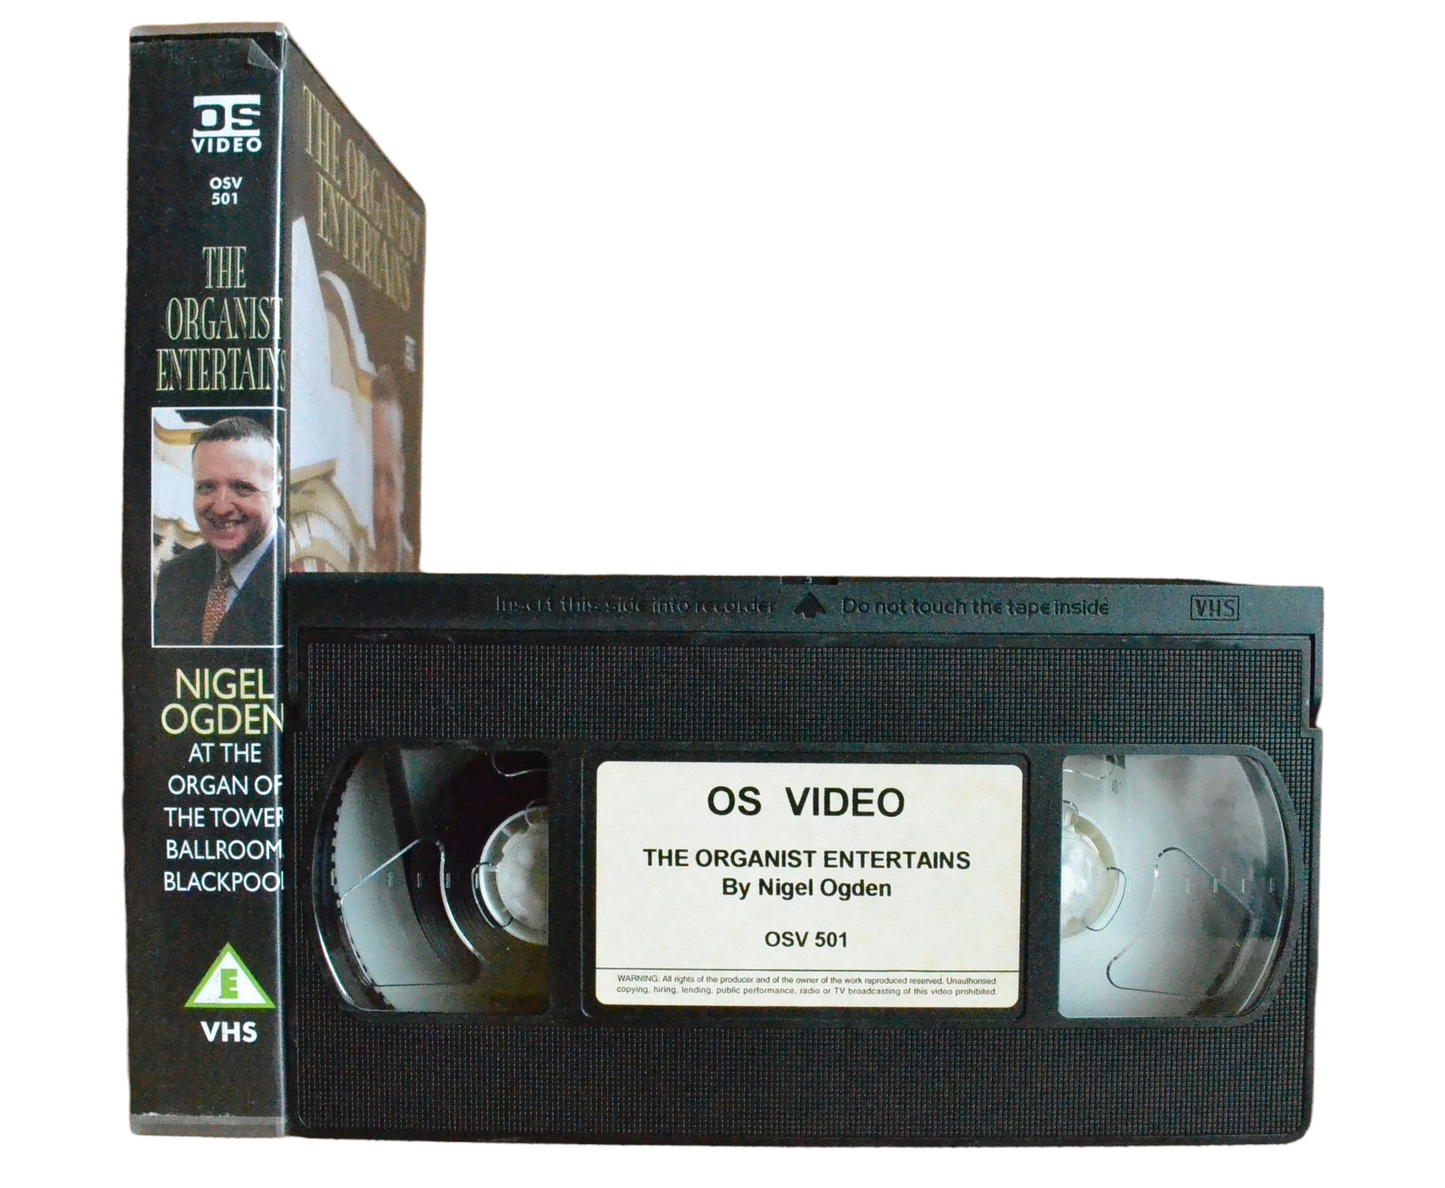 The Organist Entertains by Nigel Ogden - OS Video - Music - Pal VHS-